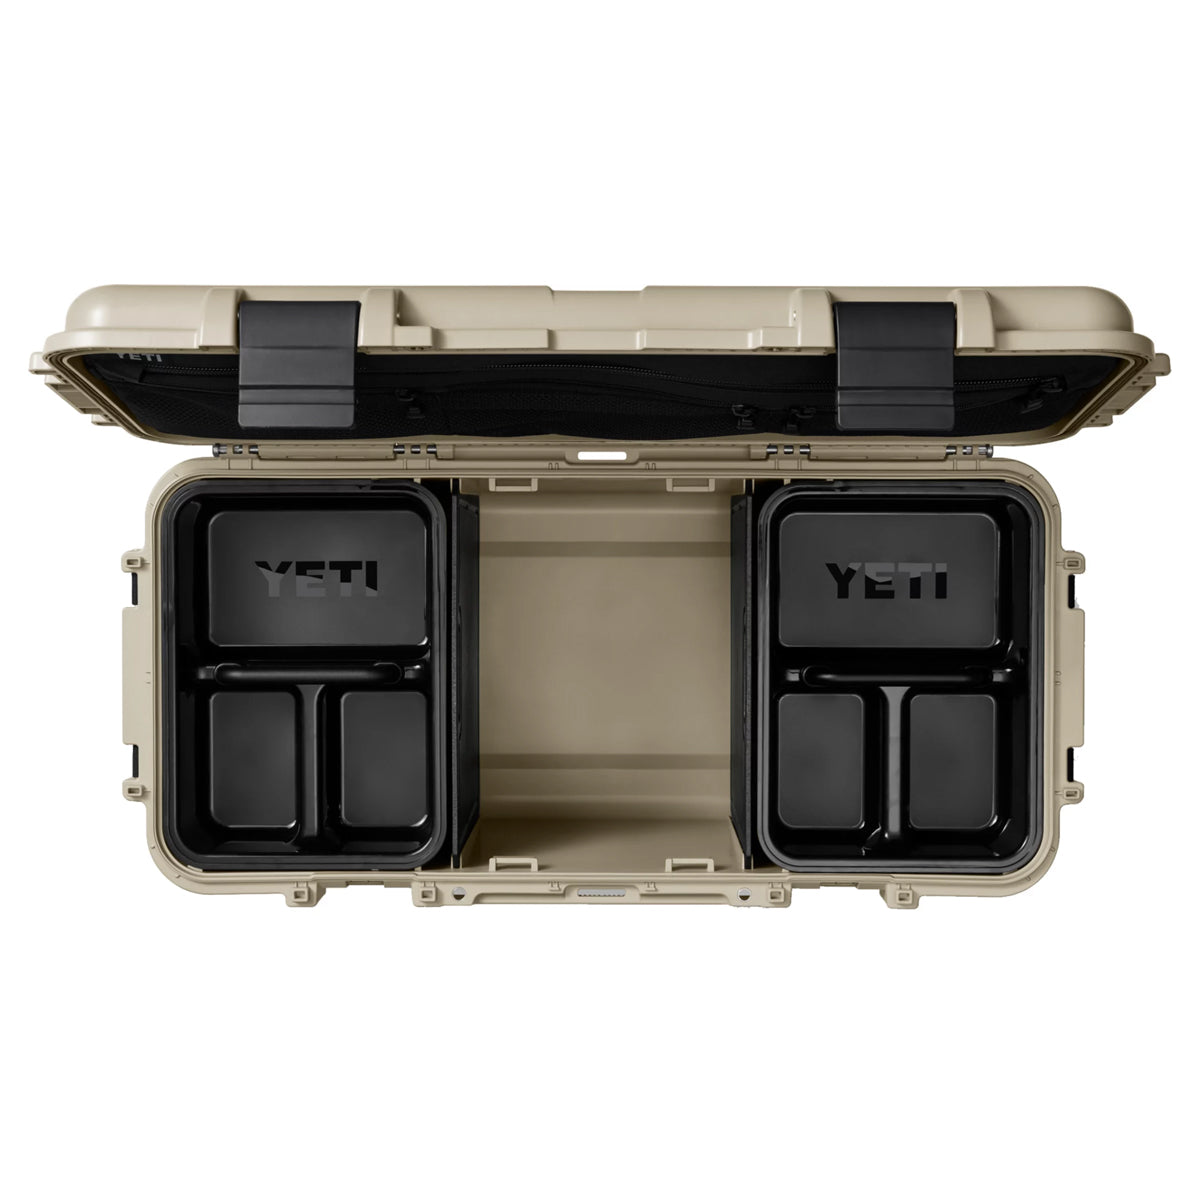 Win a decked-out YETI 60 GoBox